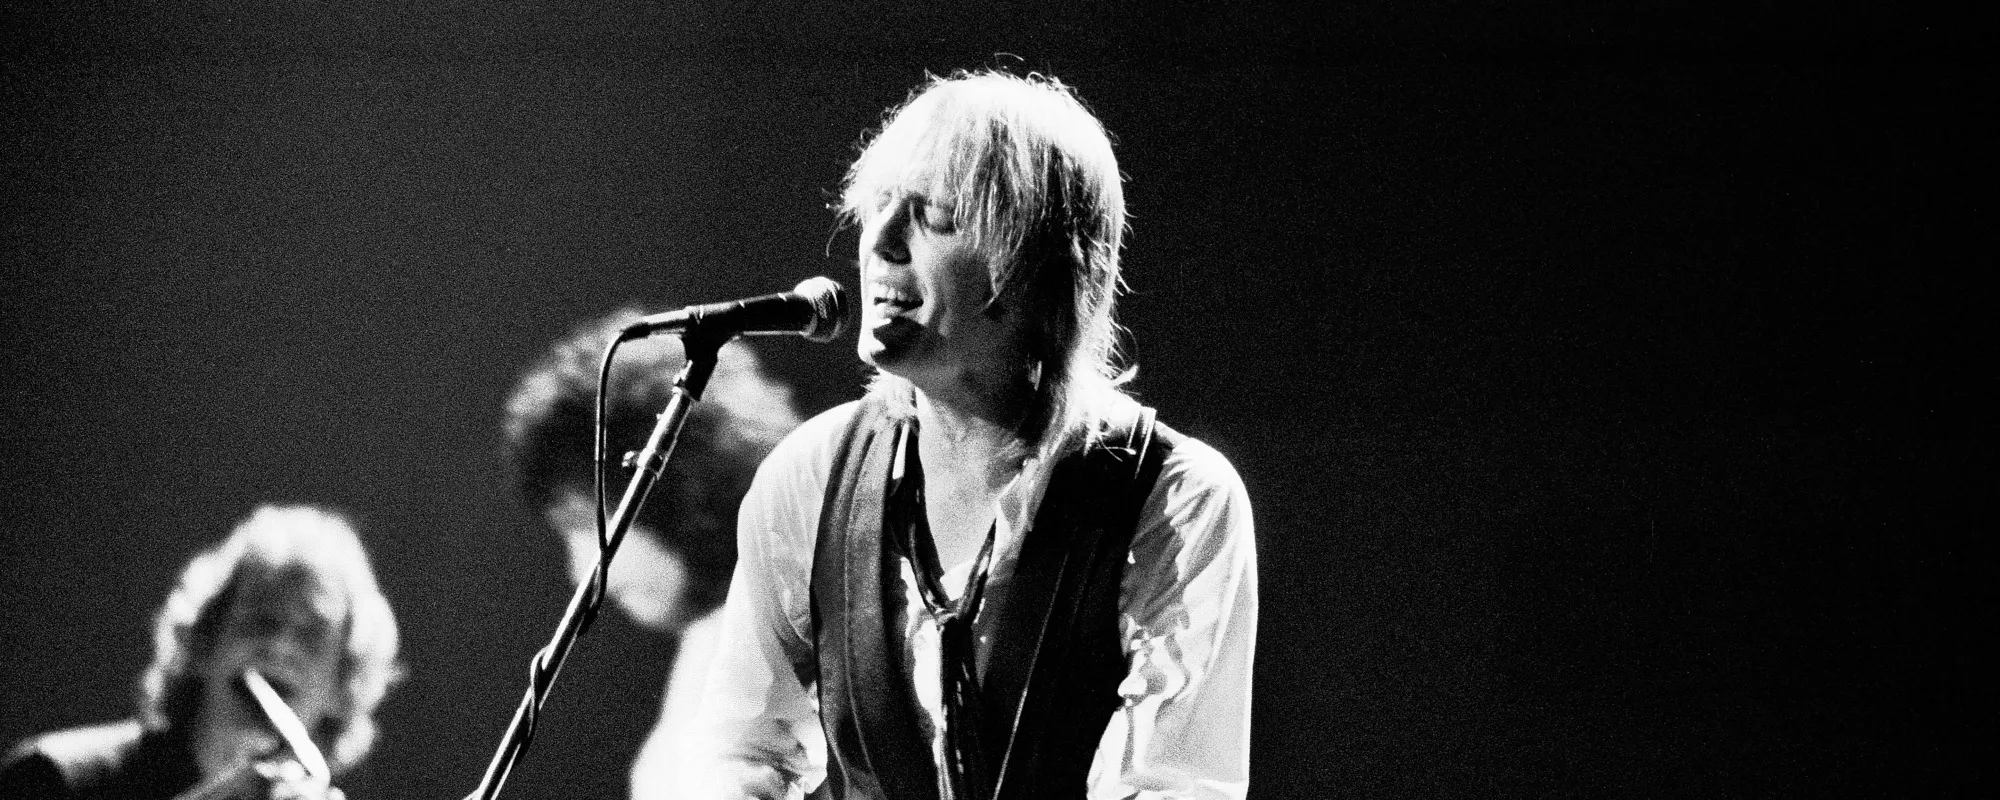 Tom Petty to Receive Posthumous Doctorate Degree